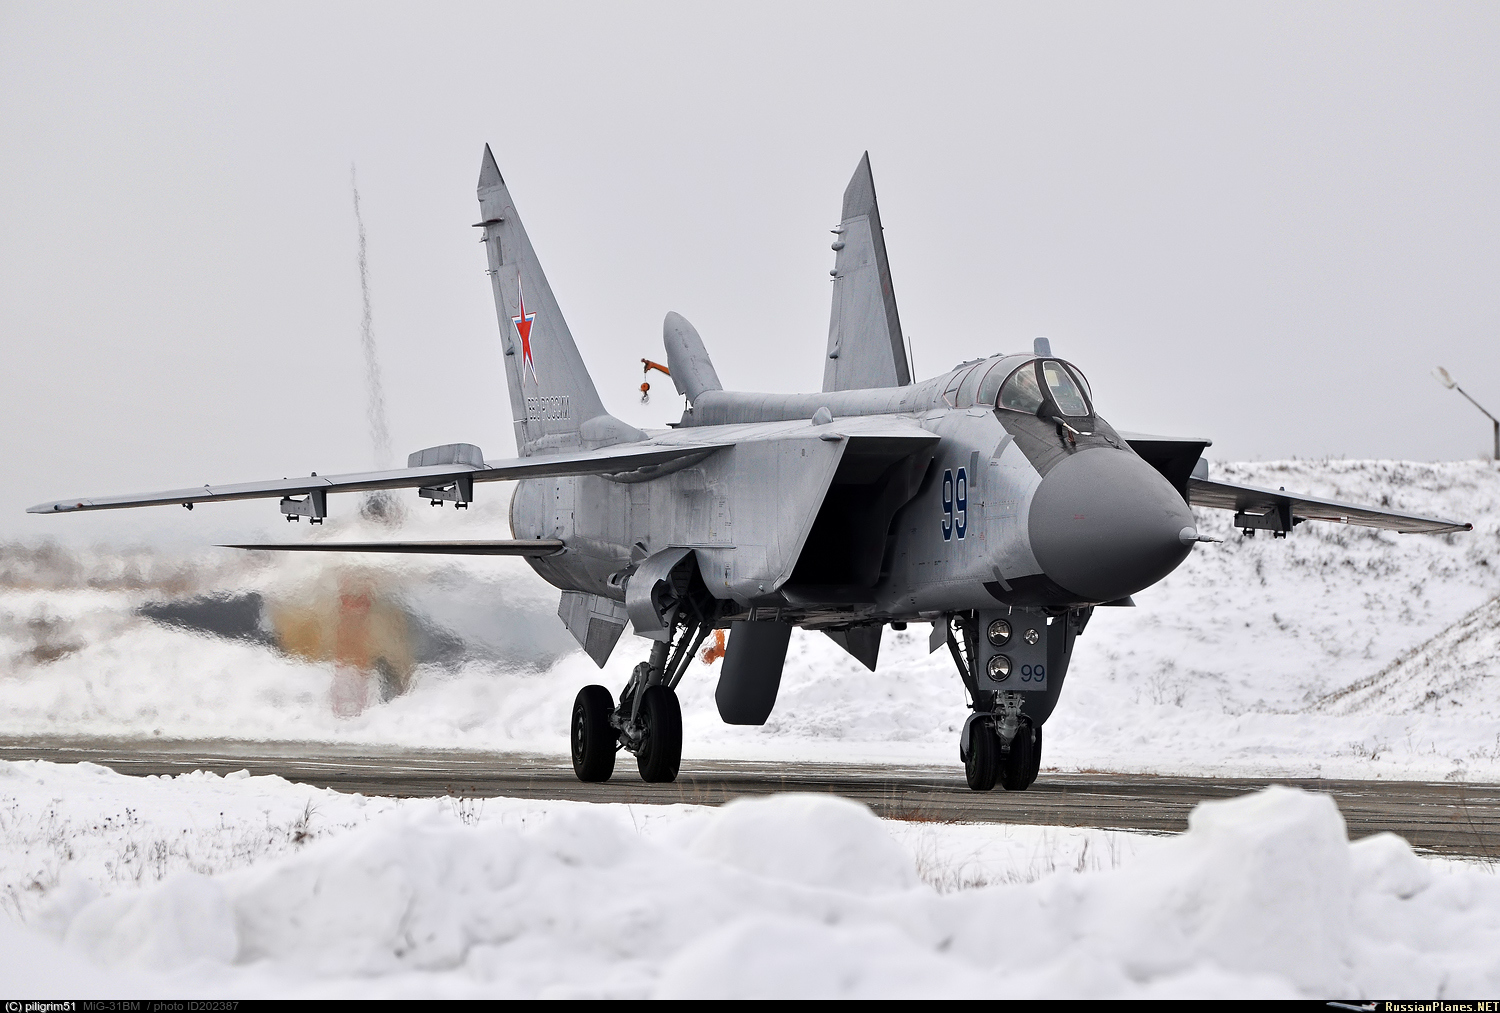 http://russianplanes.net/images/to203000/202387.jpg